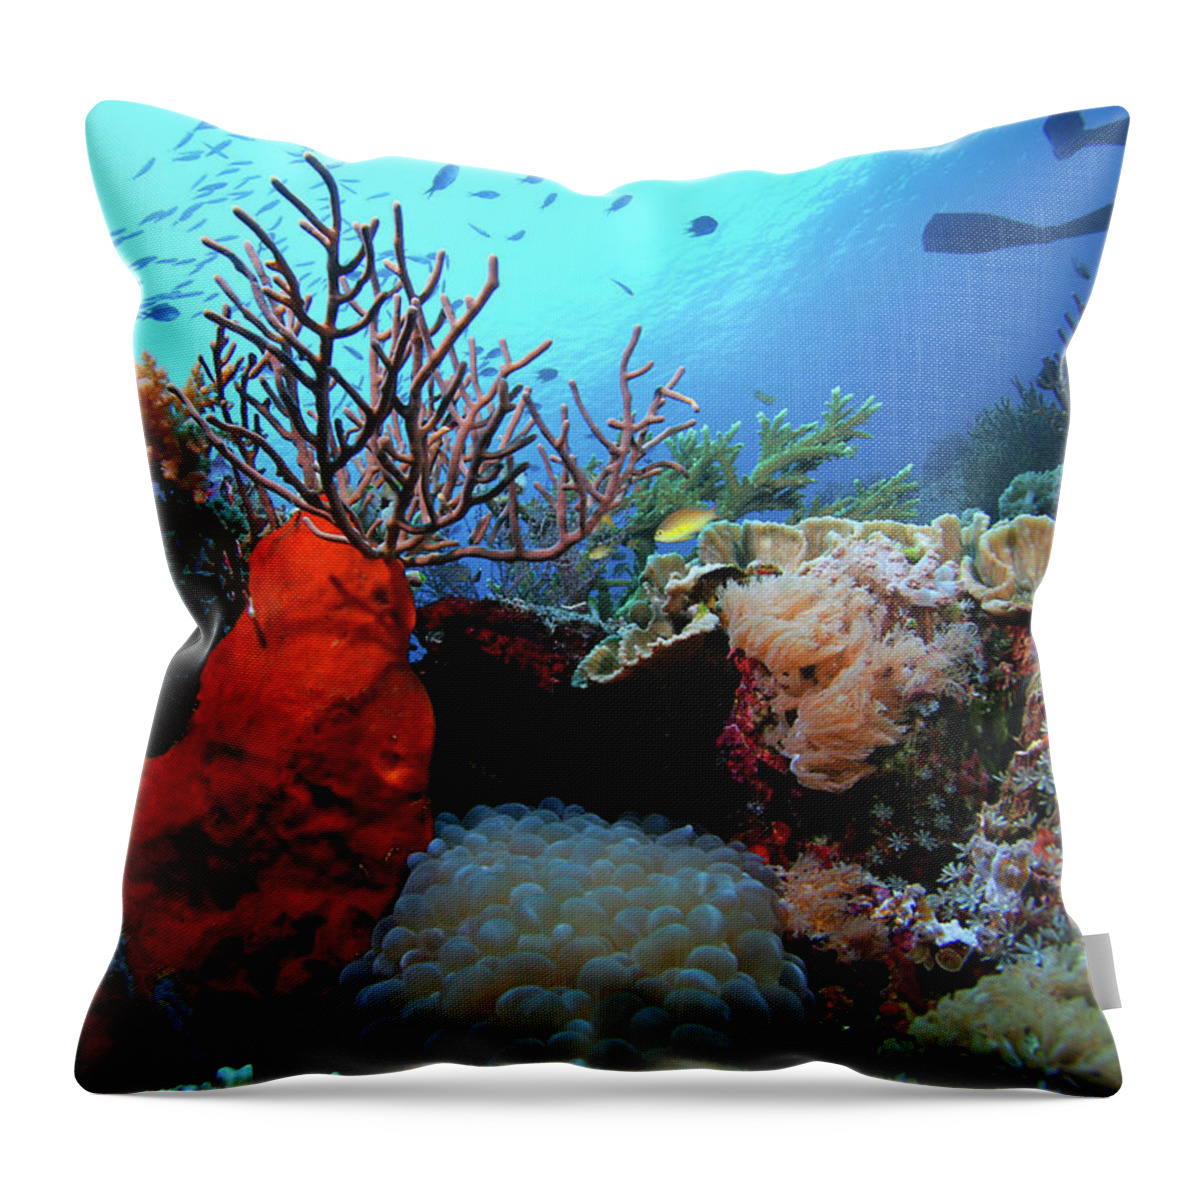 Underwater Throw Pillow featuring the photograph Underwater Reef With Coral And Fish by Cdascher